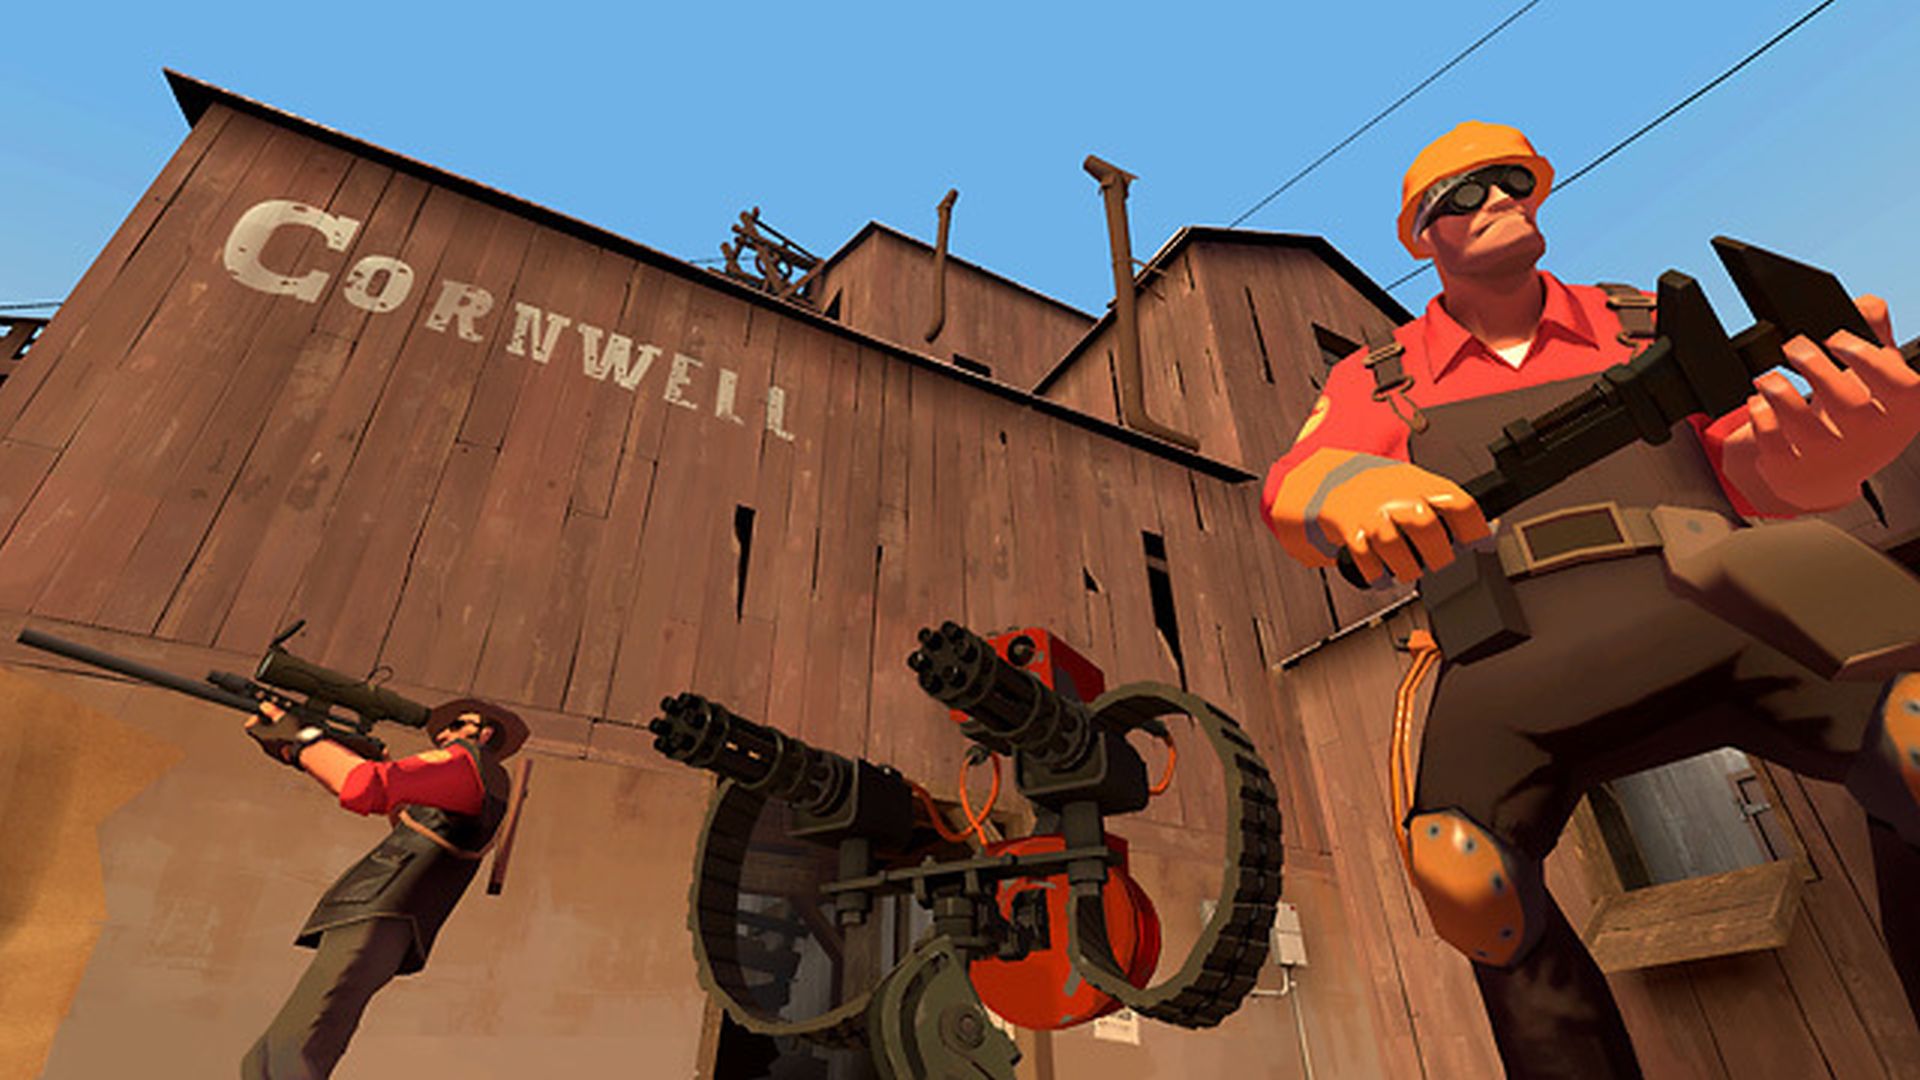 Team Fortress 2 players plan